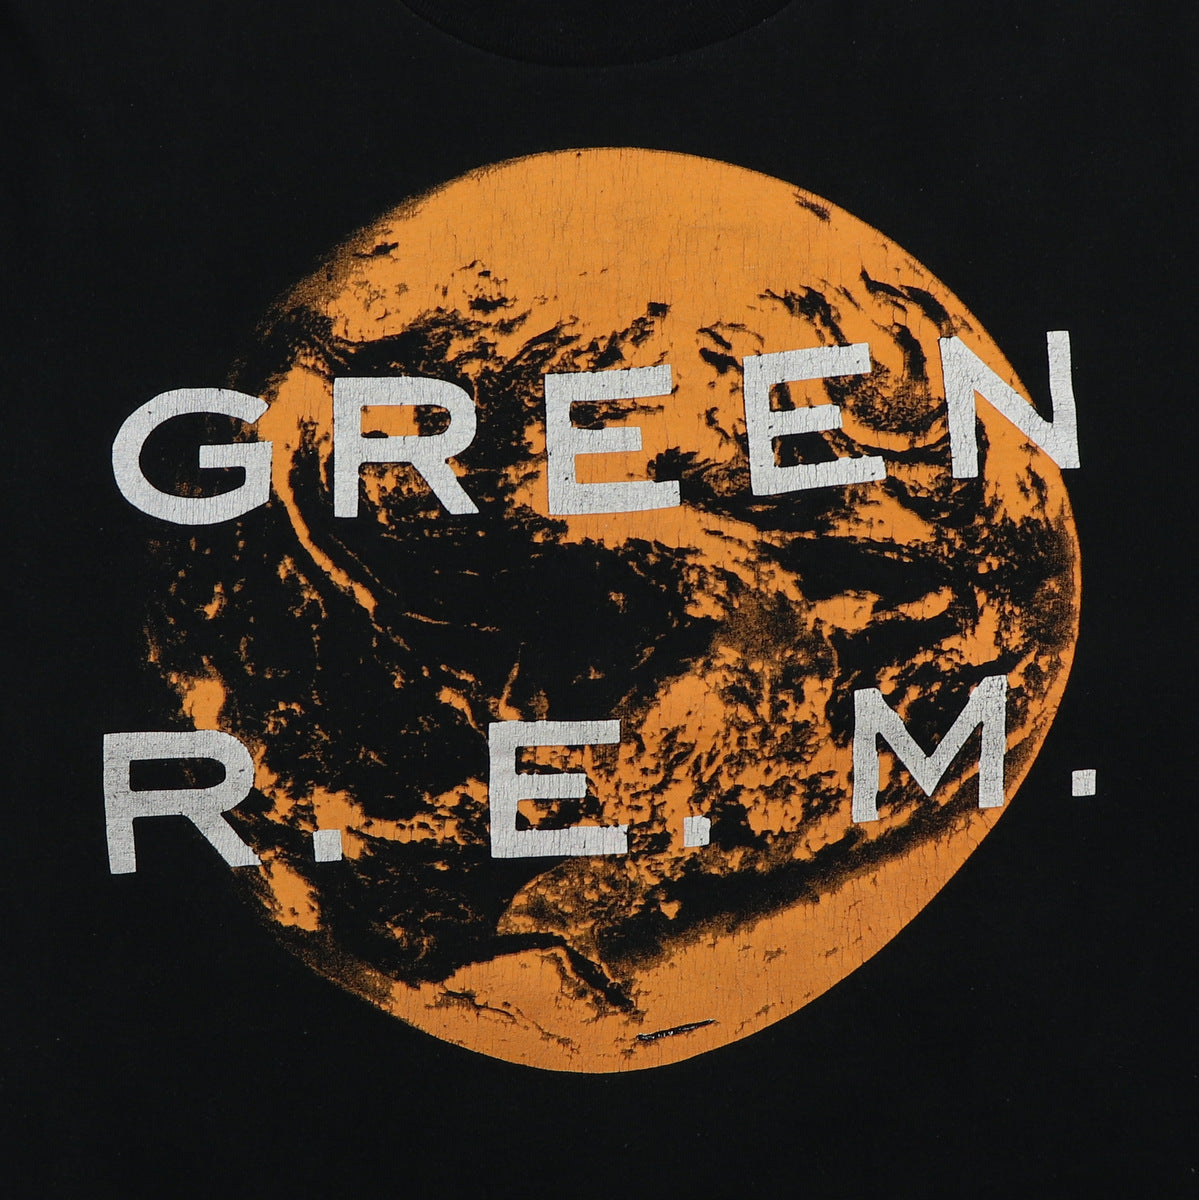 1989 R.E.M. Green You Are The Everything Shirt